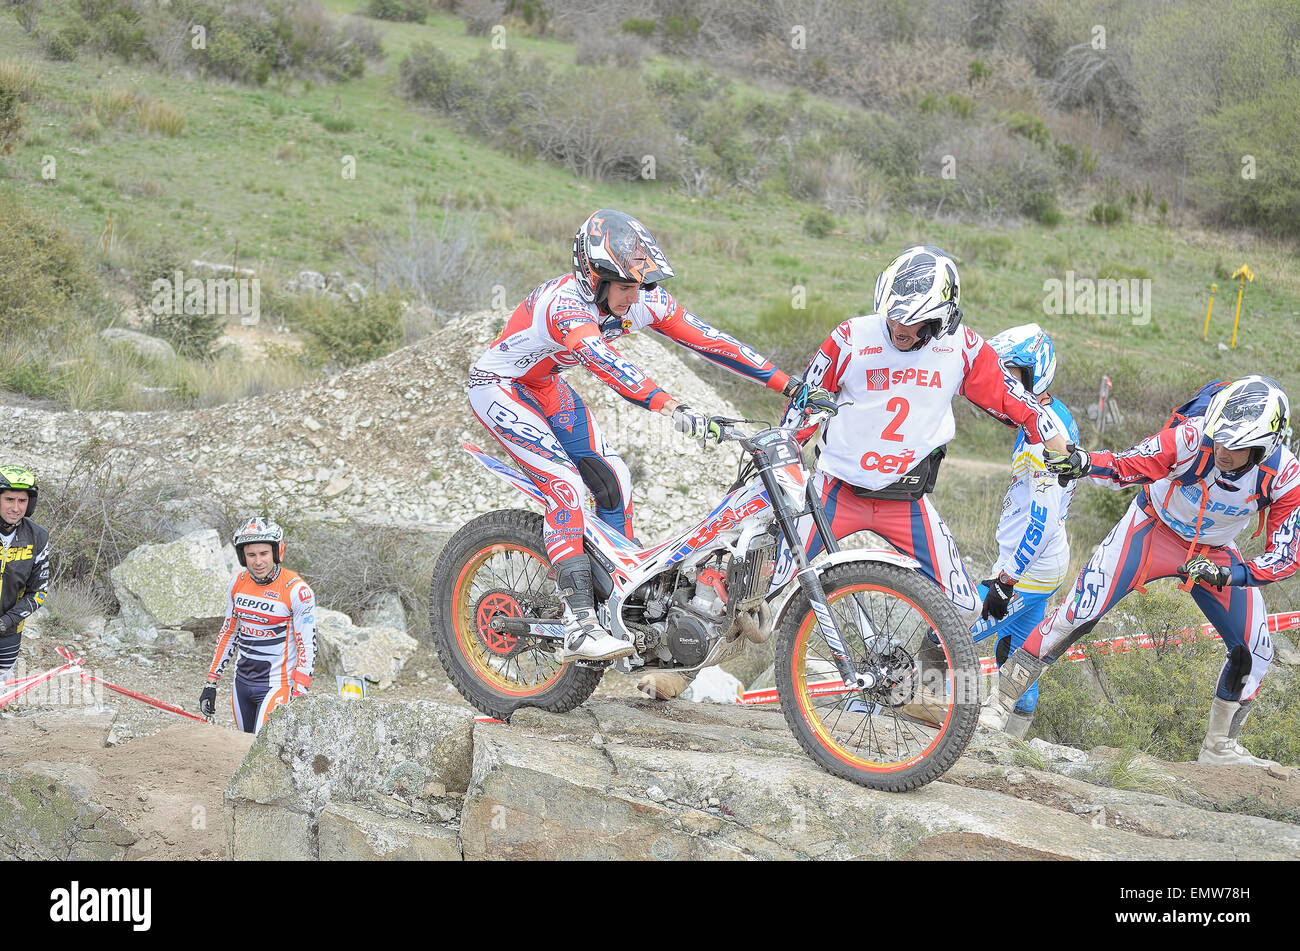 Spain trial championship. Toni Bou and other unknown people are looking at Jeroni Fajardo, when he is jumping over granite rocks Stock Photo